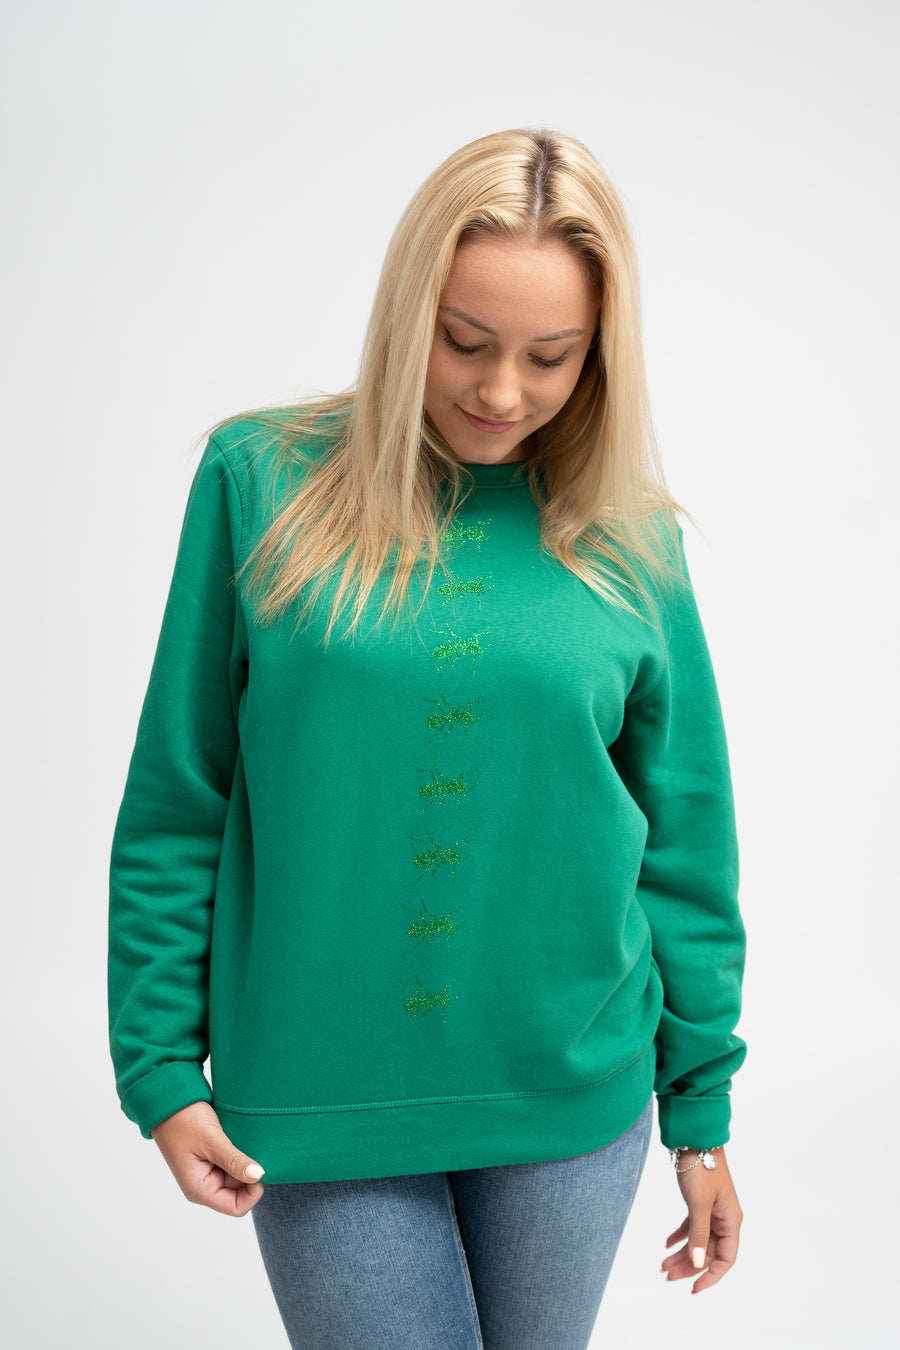 Green Sweater and Glittery Ants - SAMPLE -30%